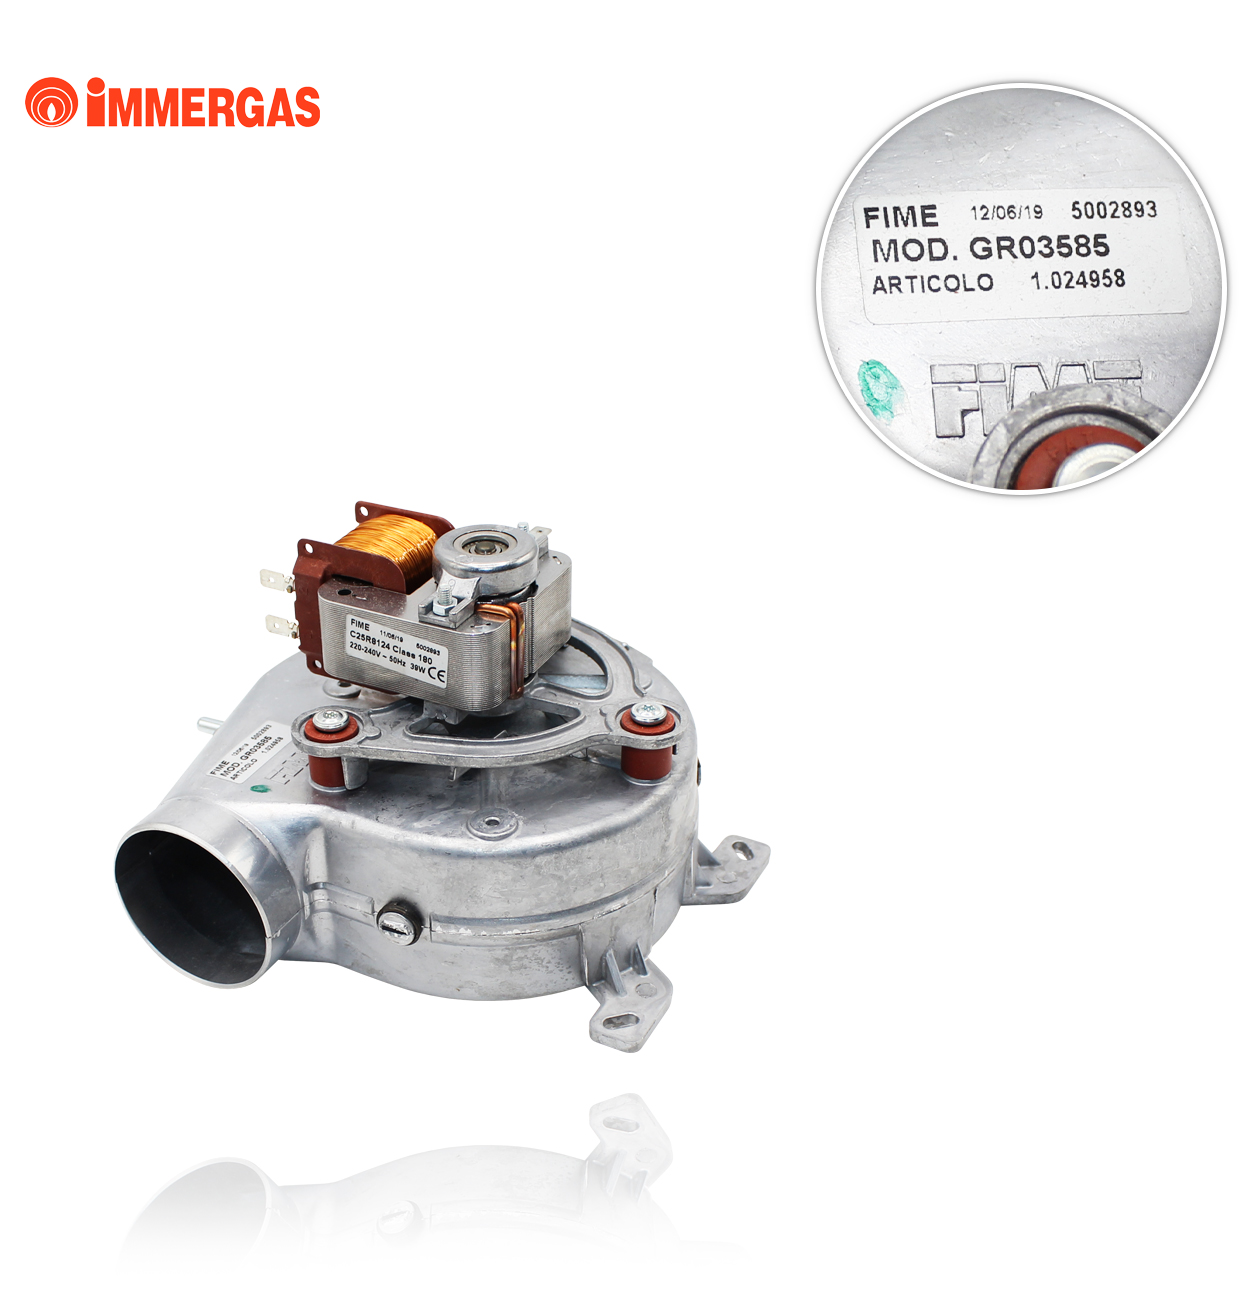 IMMERGAS 1024958 FIME EXTRACTOR 39W